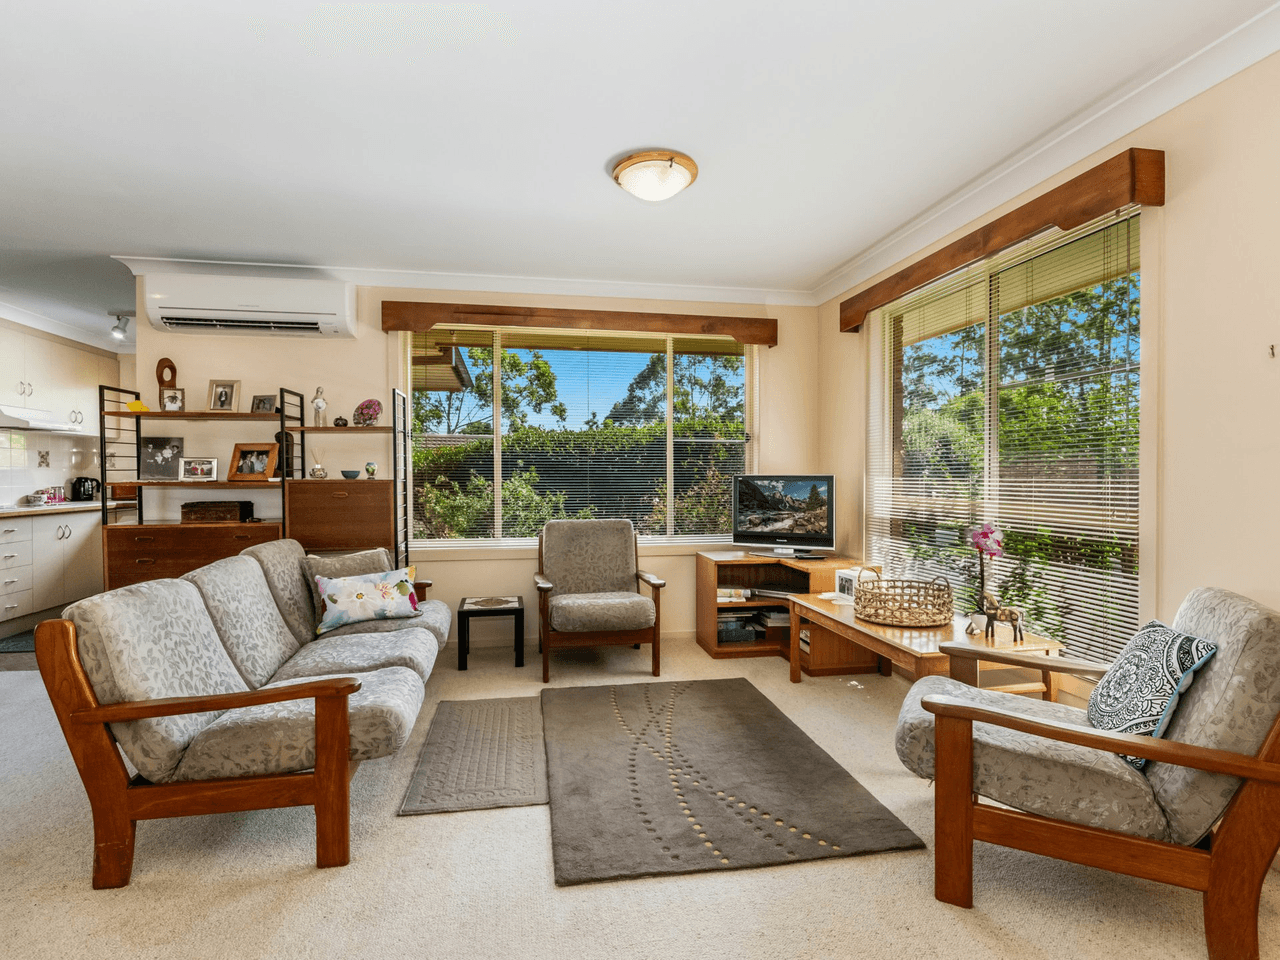 2/6 Kingfisher Place, GOONELLABAH, NSW 2480